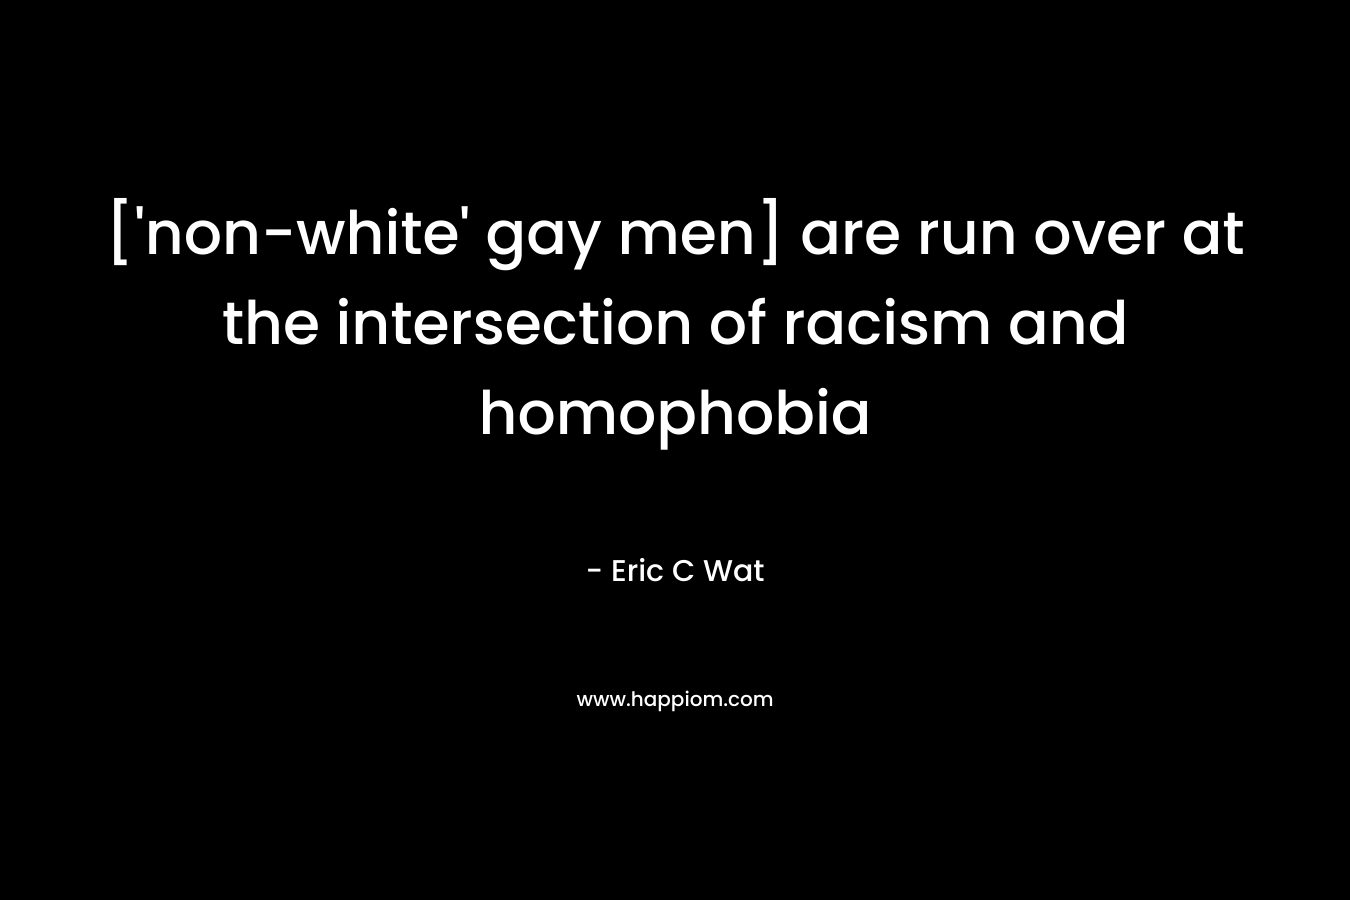 ['non-white' gay men] are run over at the intersection of racism and homophobia